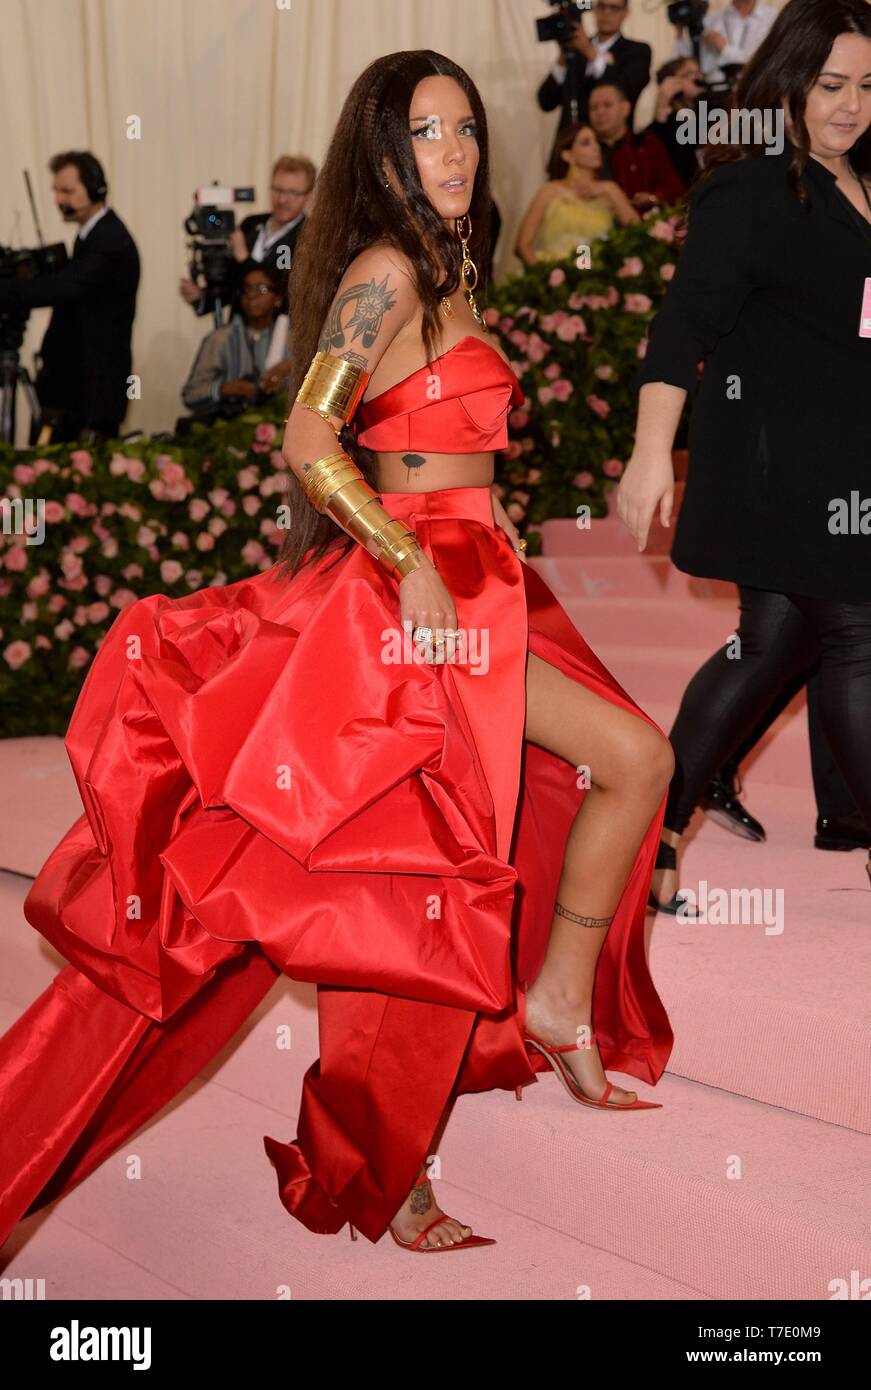 New York, NY, USA. 6th May, 2019. Halsey at arrivals for Camp: Notes on Fashion Met Gala Costume Institute Annual Benefit - Part 2, Metropolitan Museum of Art, New York, NY May 6, 2019. Credit: Everett Collection Inc/Alamy Live News Stock Photo